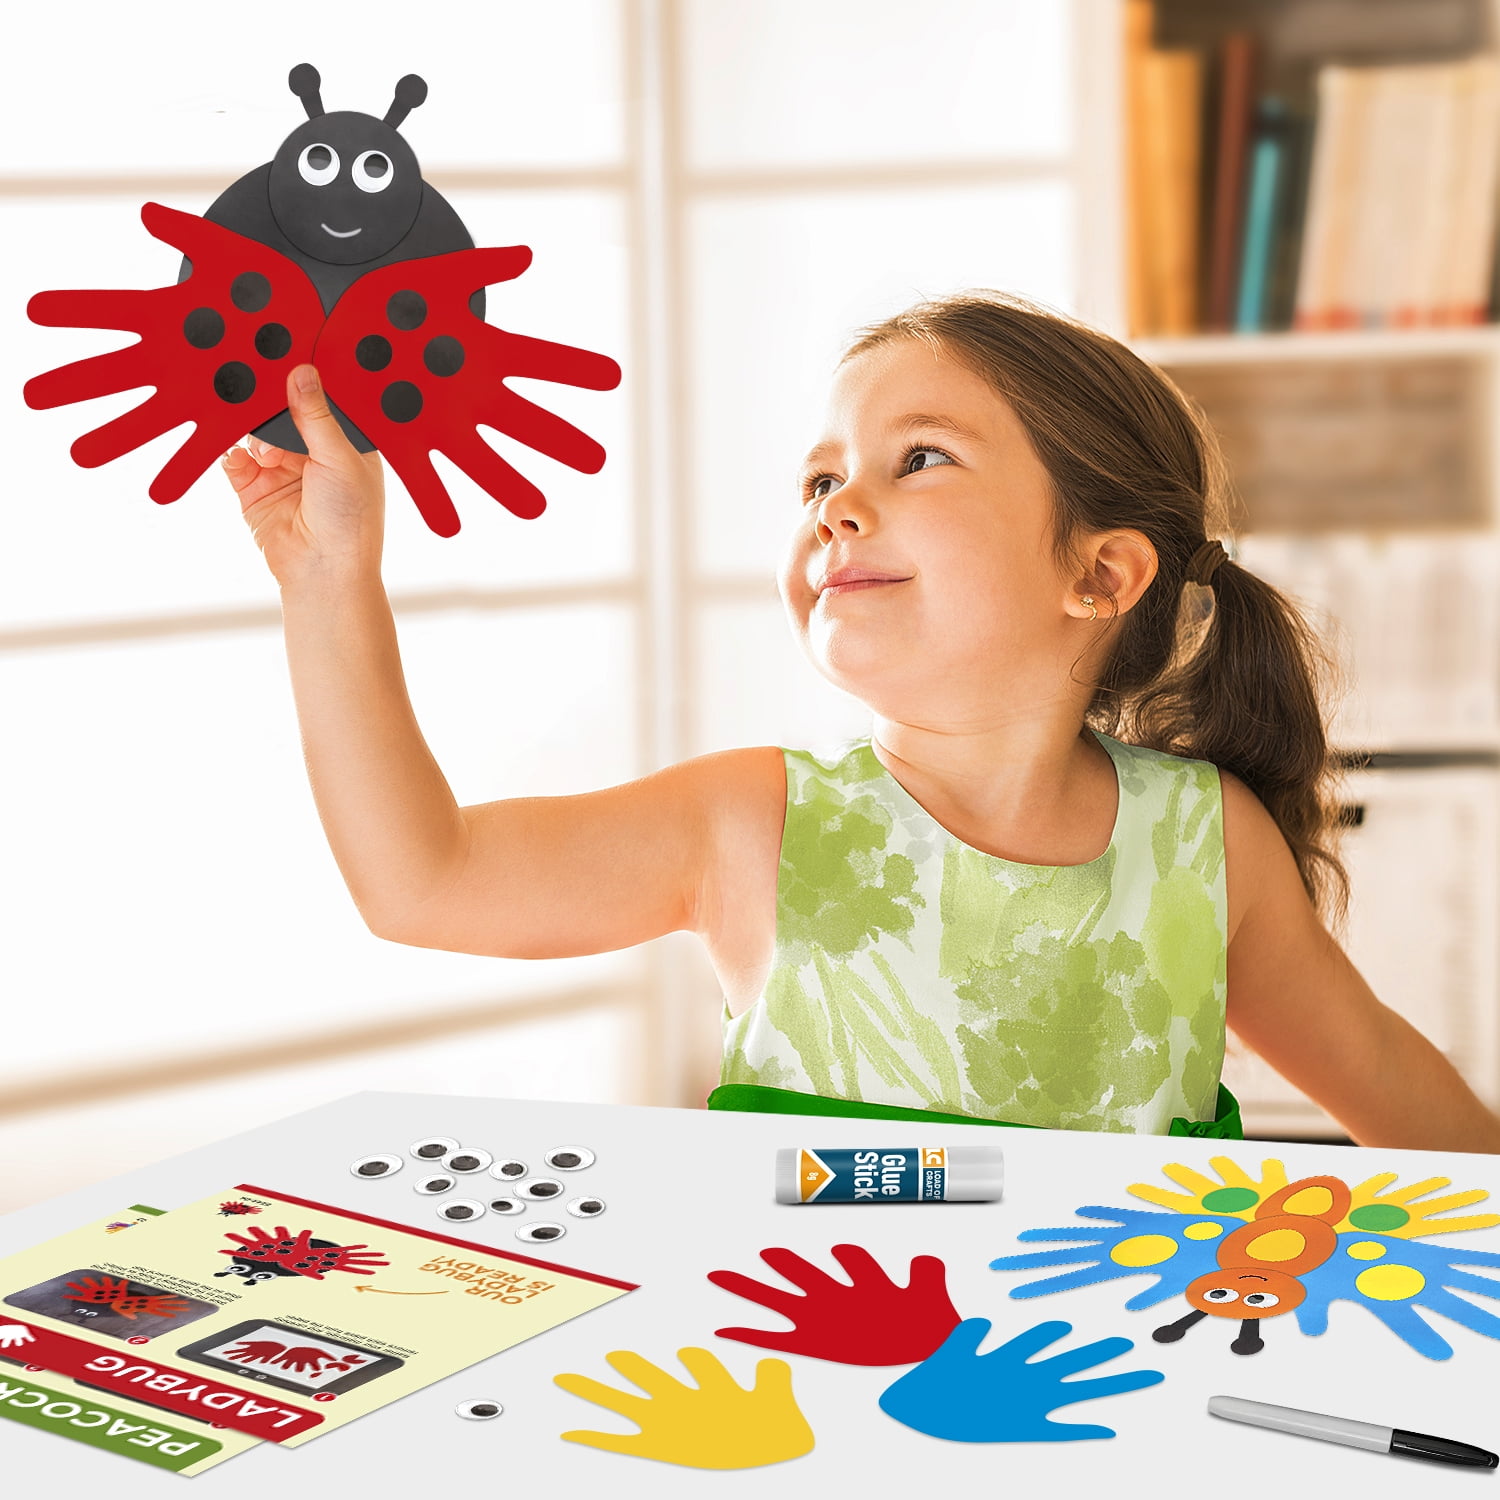 15 Fun & Unique Types of DIY Art & Craft DIY Kits For Kids Of All Ages —  PaperMarket